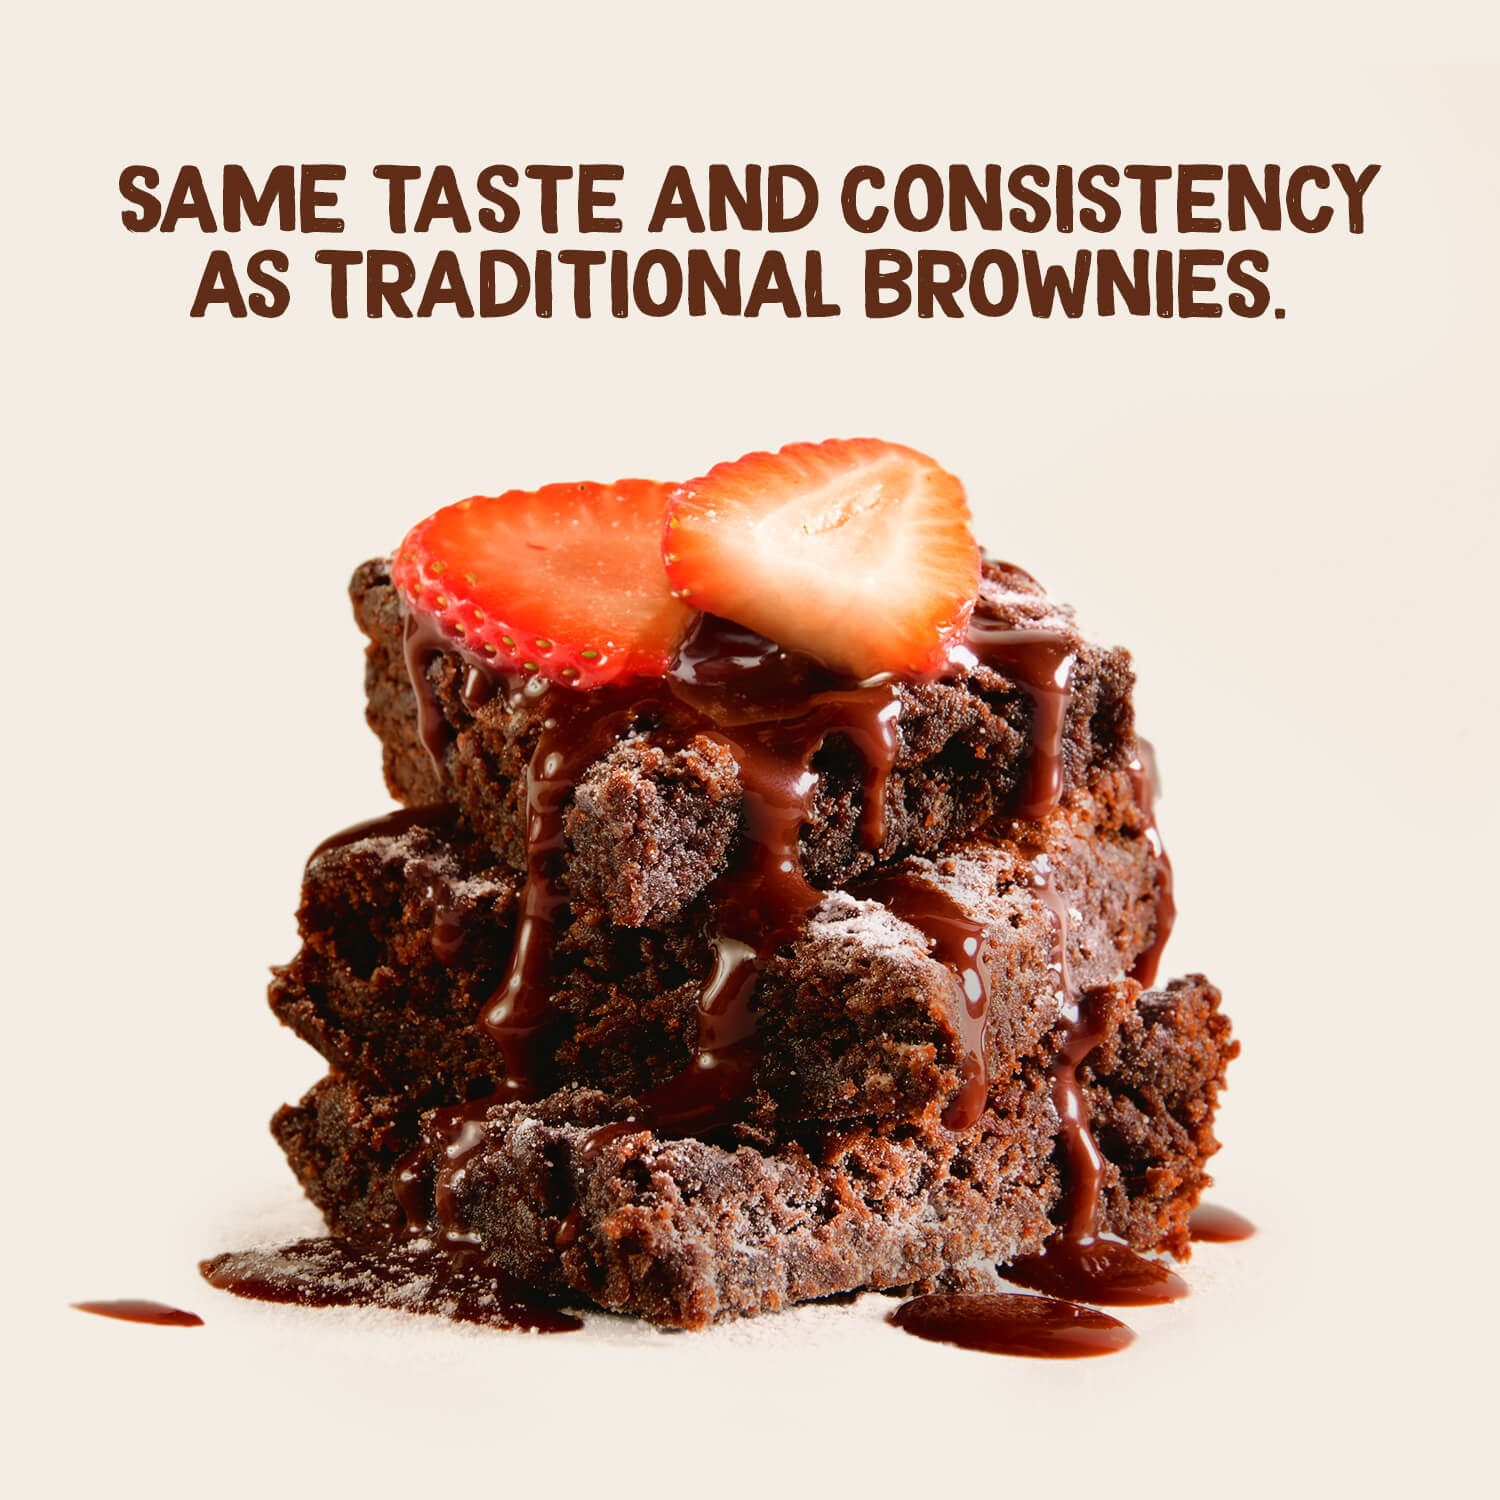 sugar free mix with same taste and consistency as traditional brownies